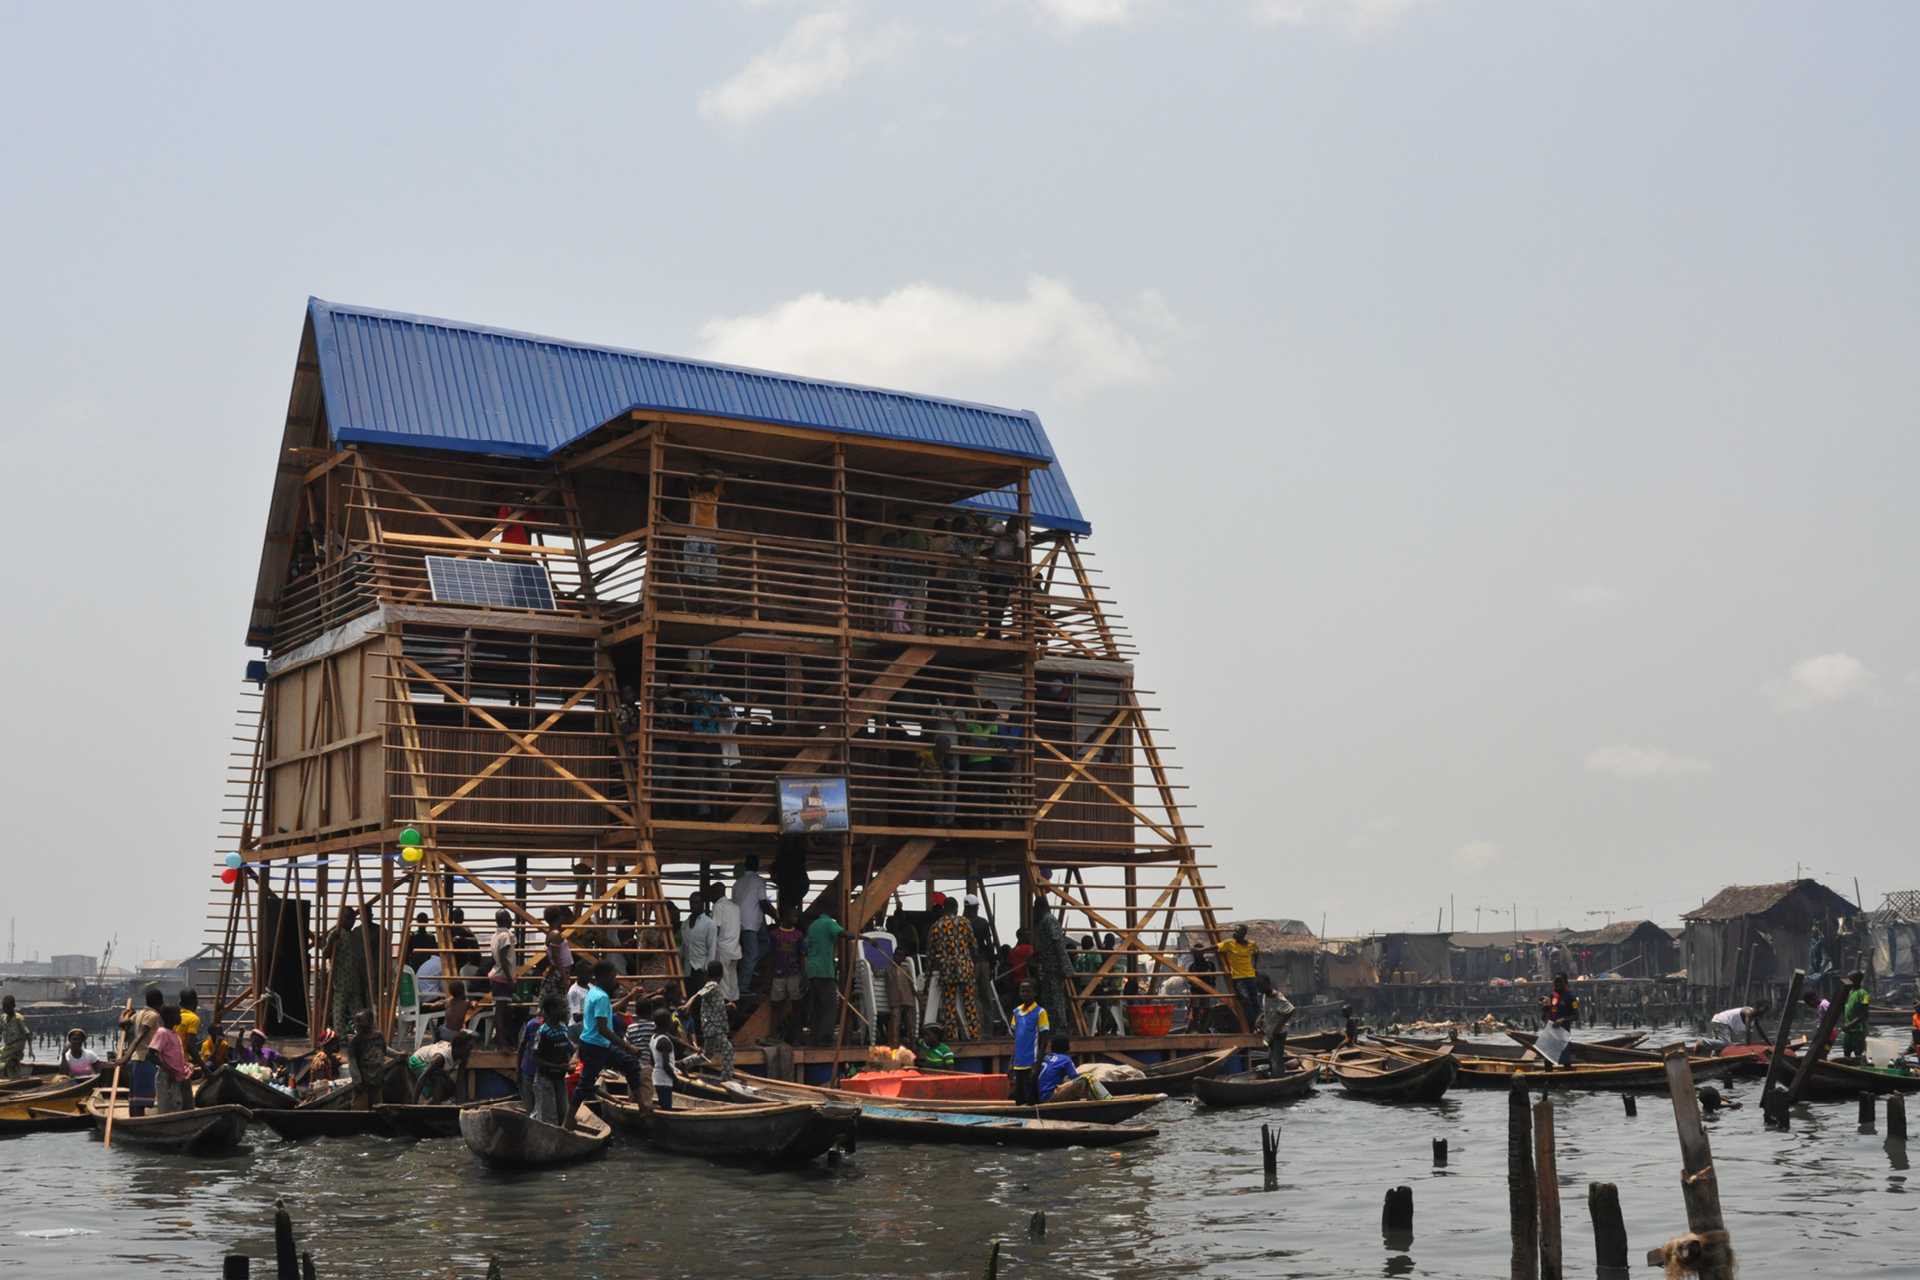 The Makoko Floating School is an open aired wooden building that sits on water. Many boats surround the school.